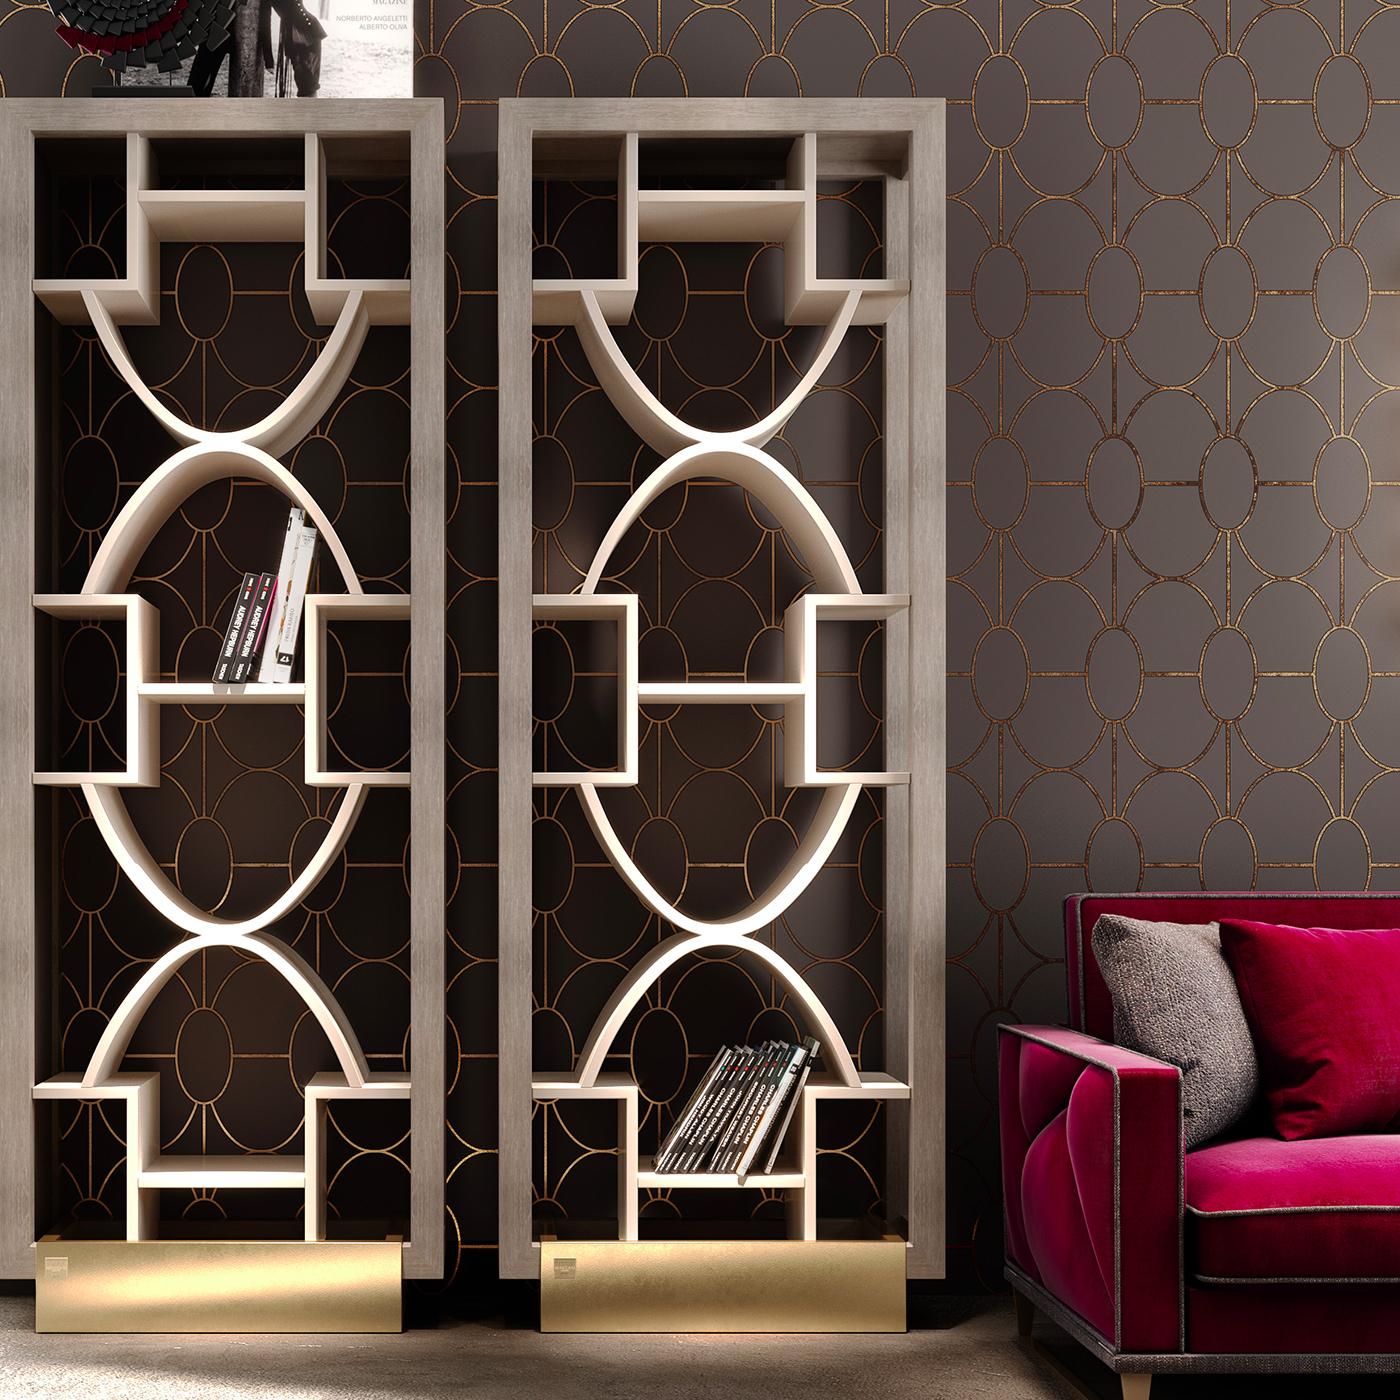 A magnificent object of functional decor, this bookcase from the Mascari Collection is a sculptural decoration for the modern home with versatile display surface provided by the lacquered poplar plywood shelves. The structure is in a blockboard with